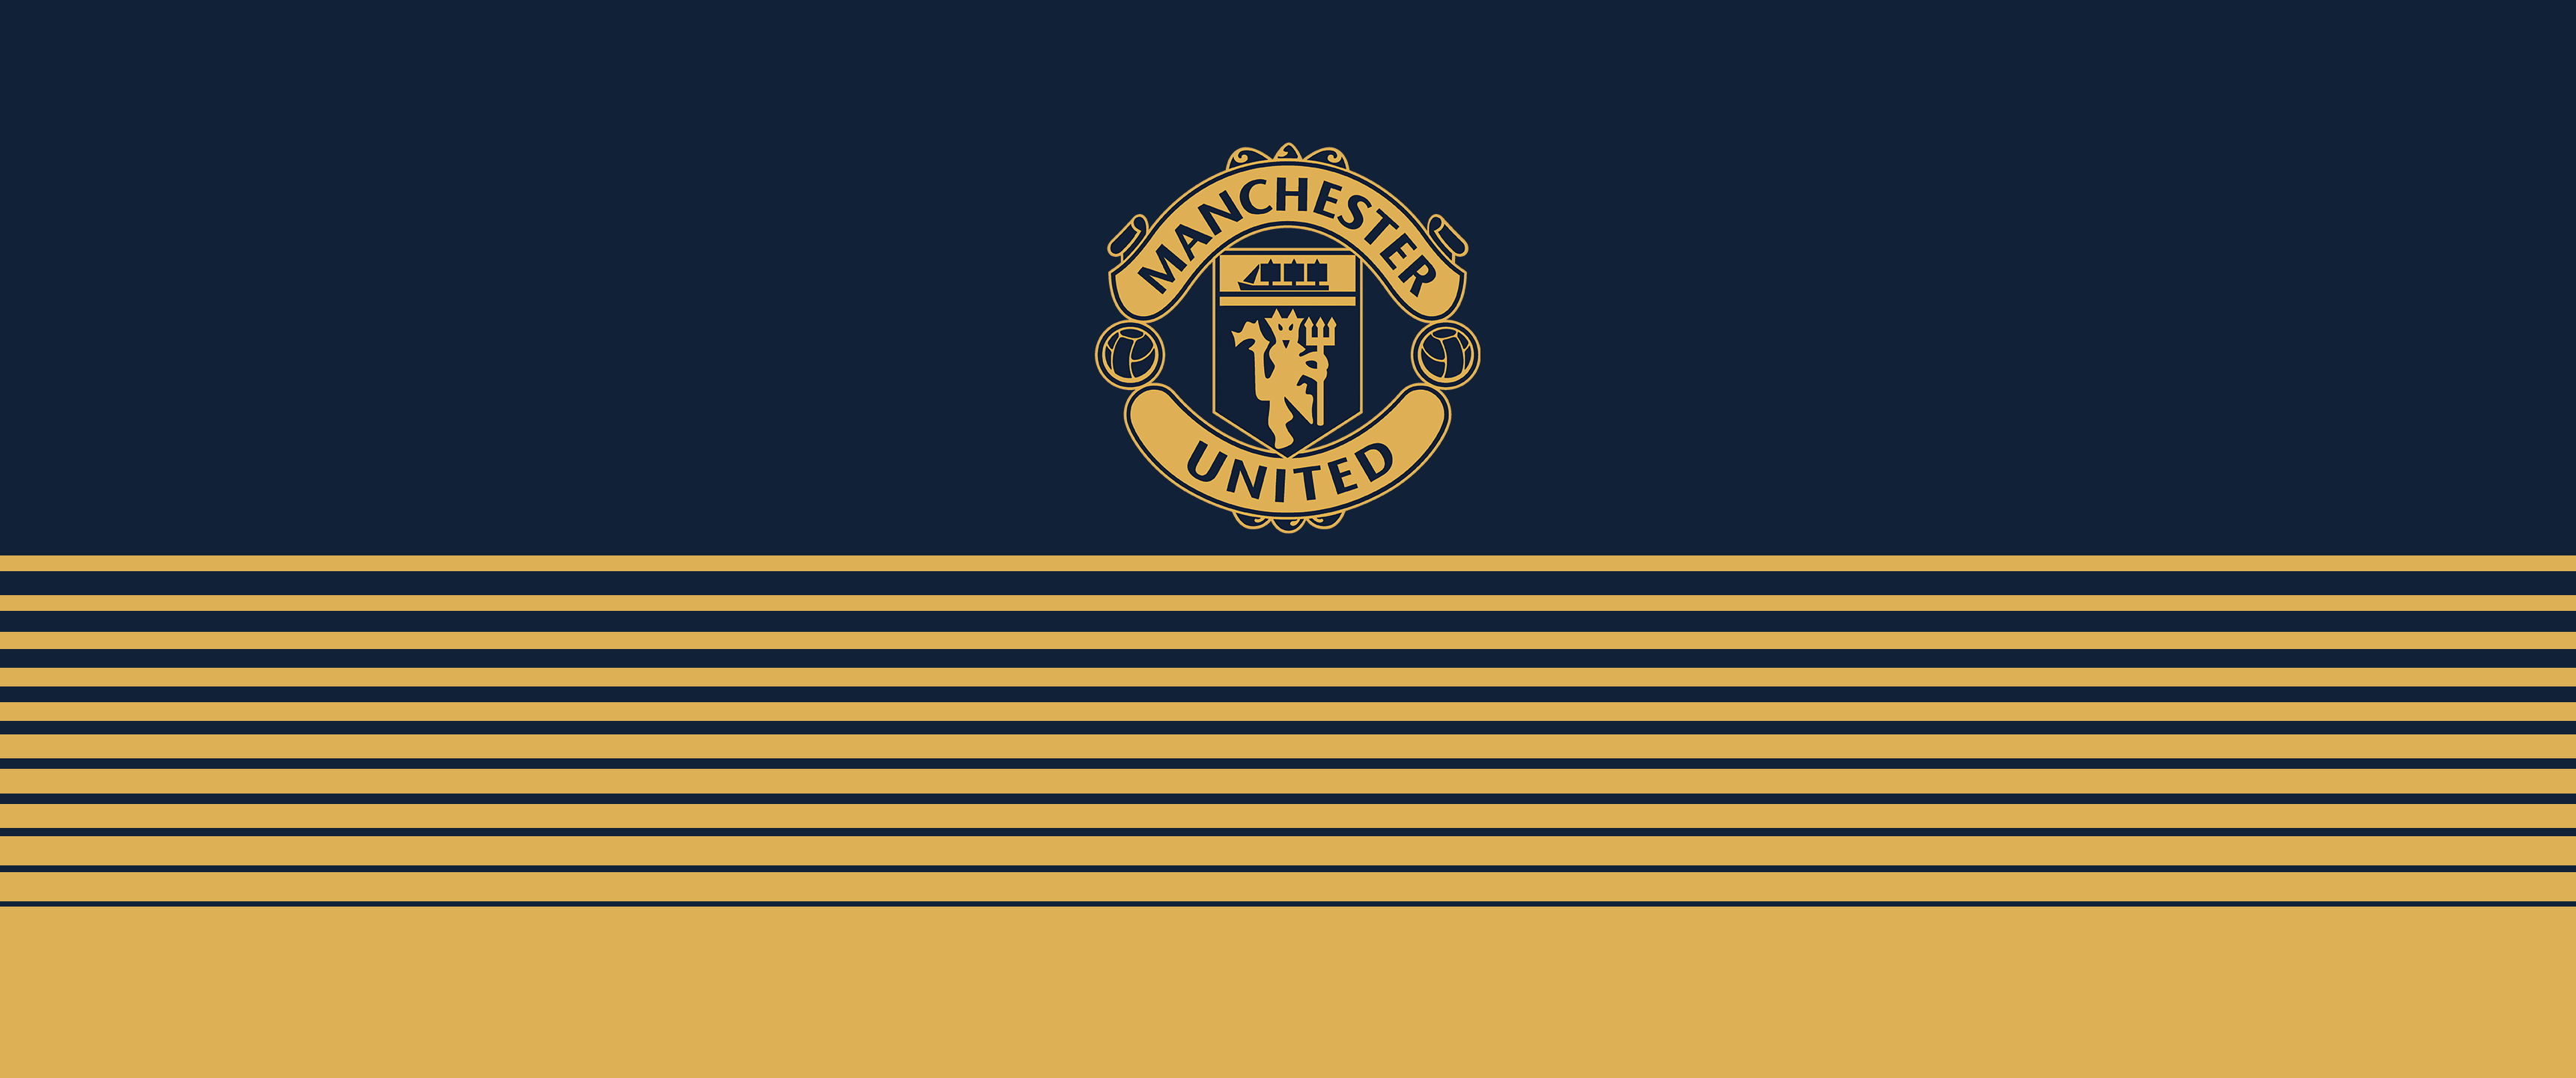 More Manchester United Wallpaper